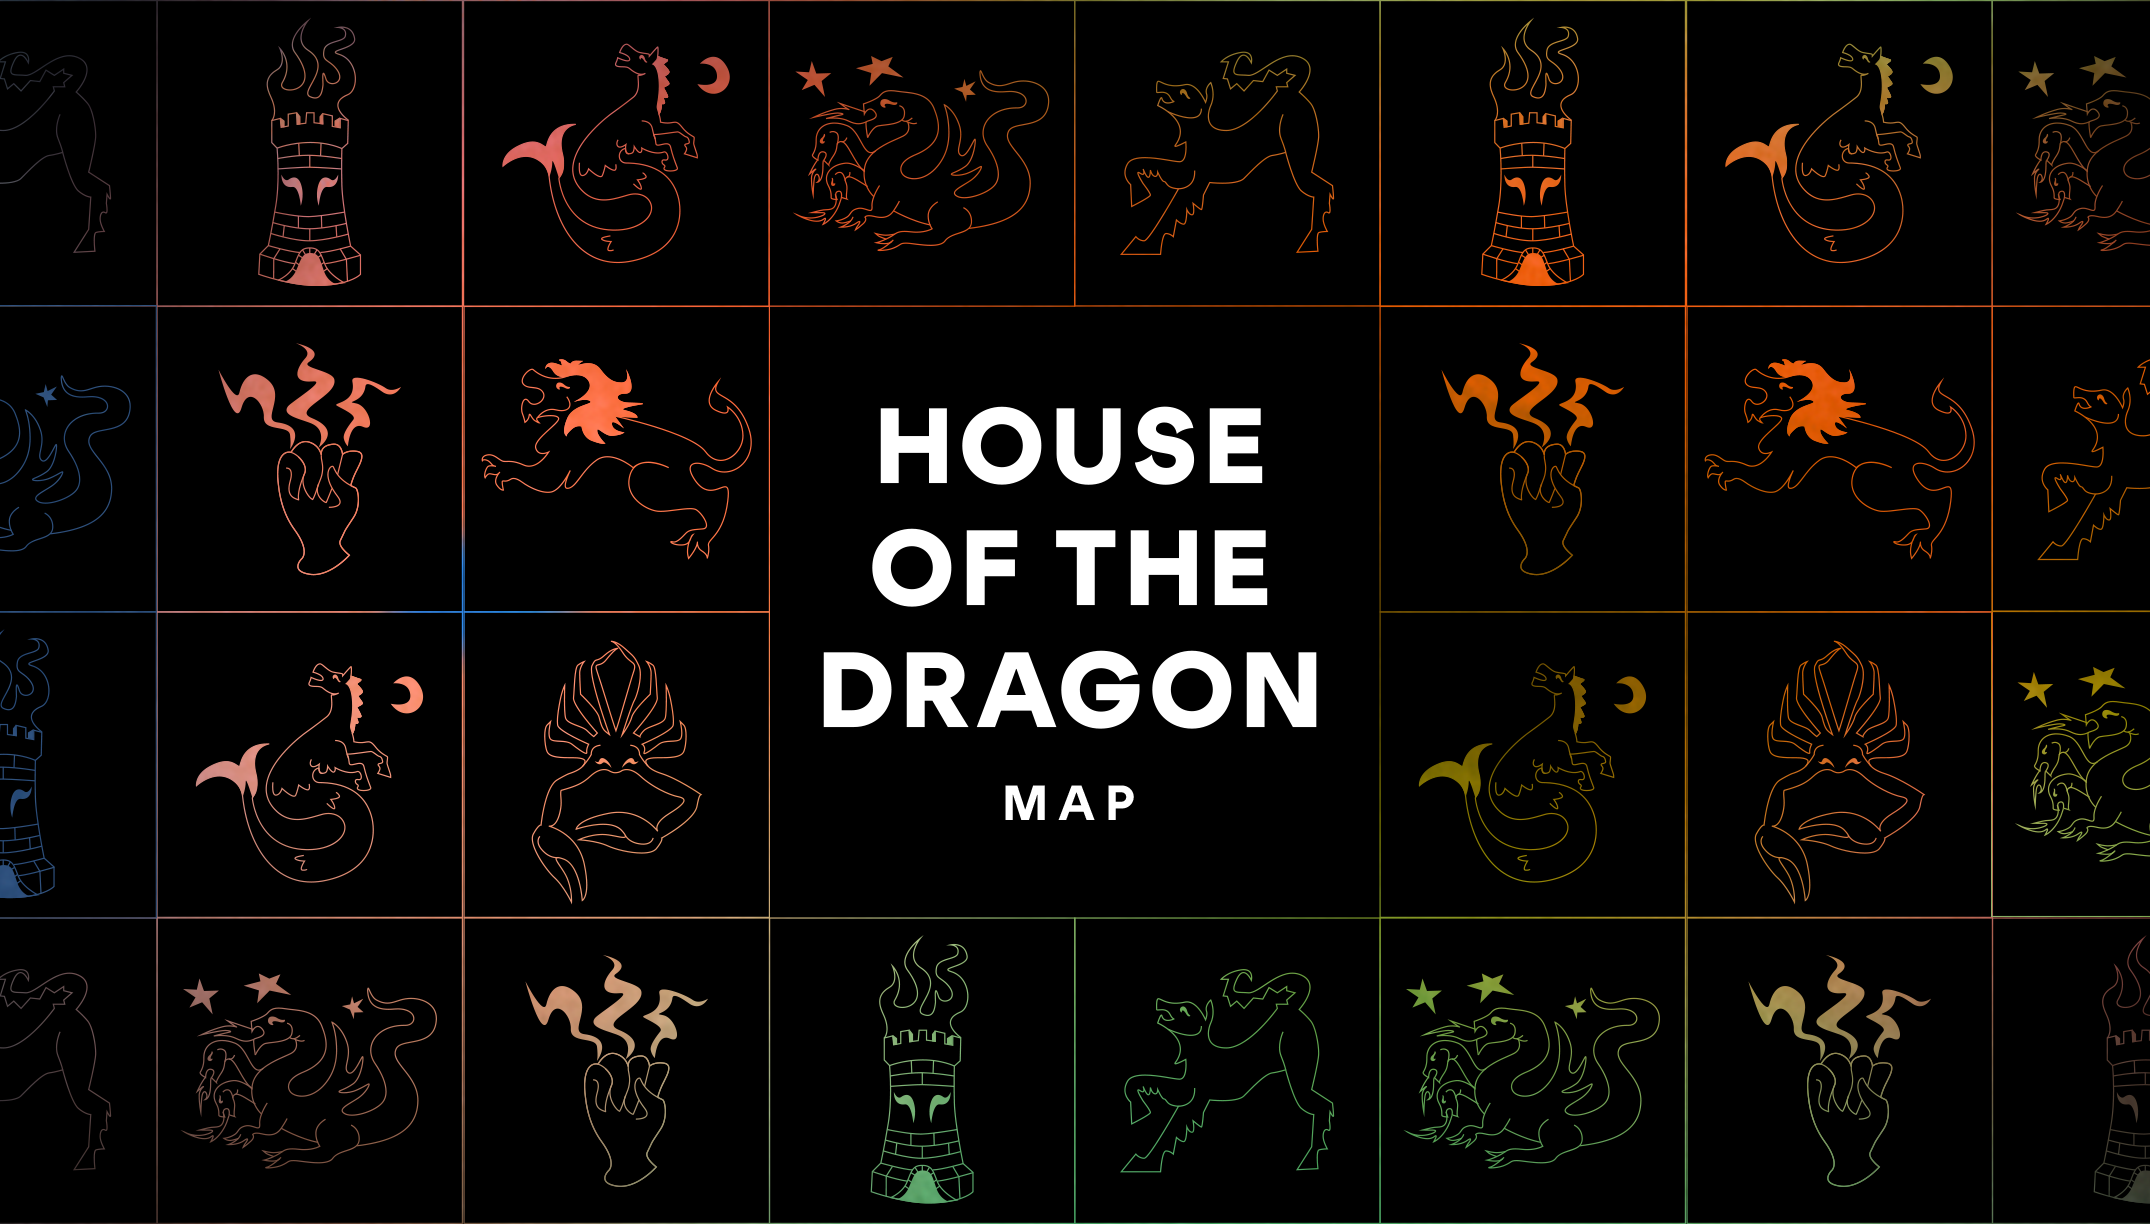 House of the Dragon' Map of Westeros